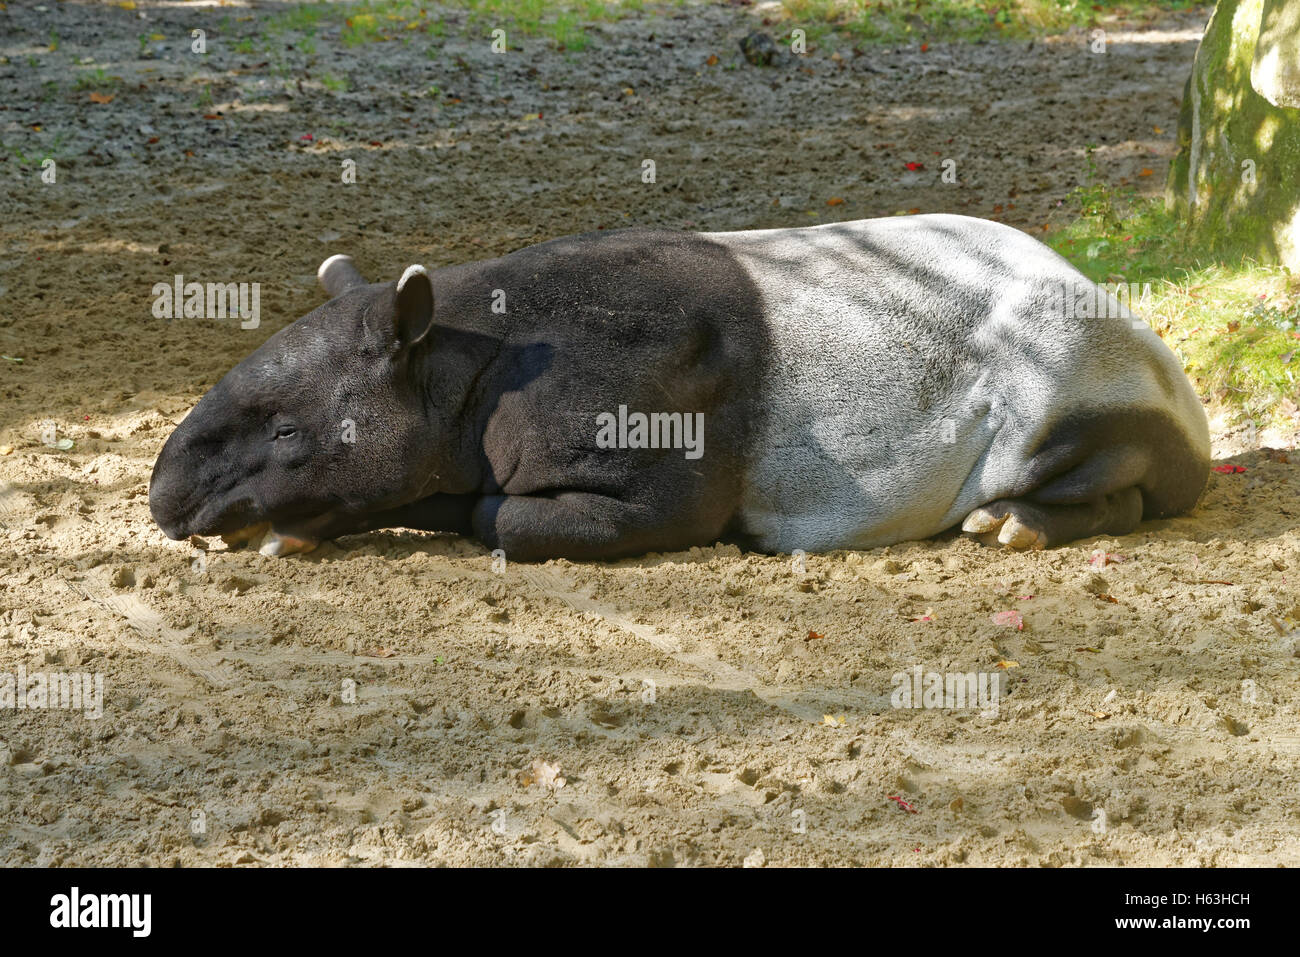 Malayan tapir (Tapirus indicus), also called the Asian tapir, is the largest of the five species of tapir and the only one nativ Stock Photo